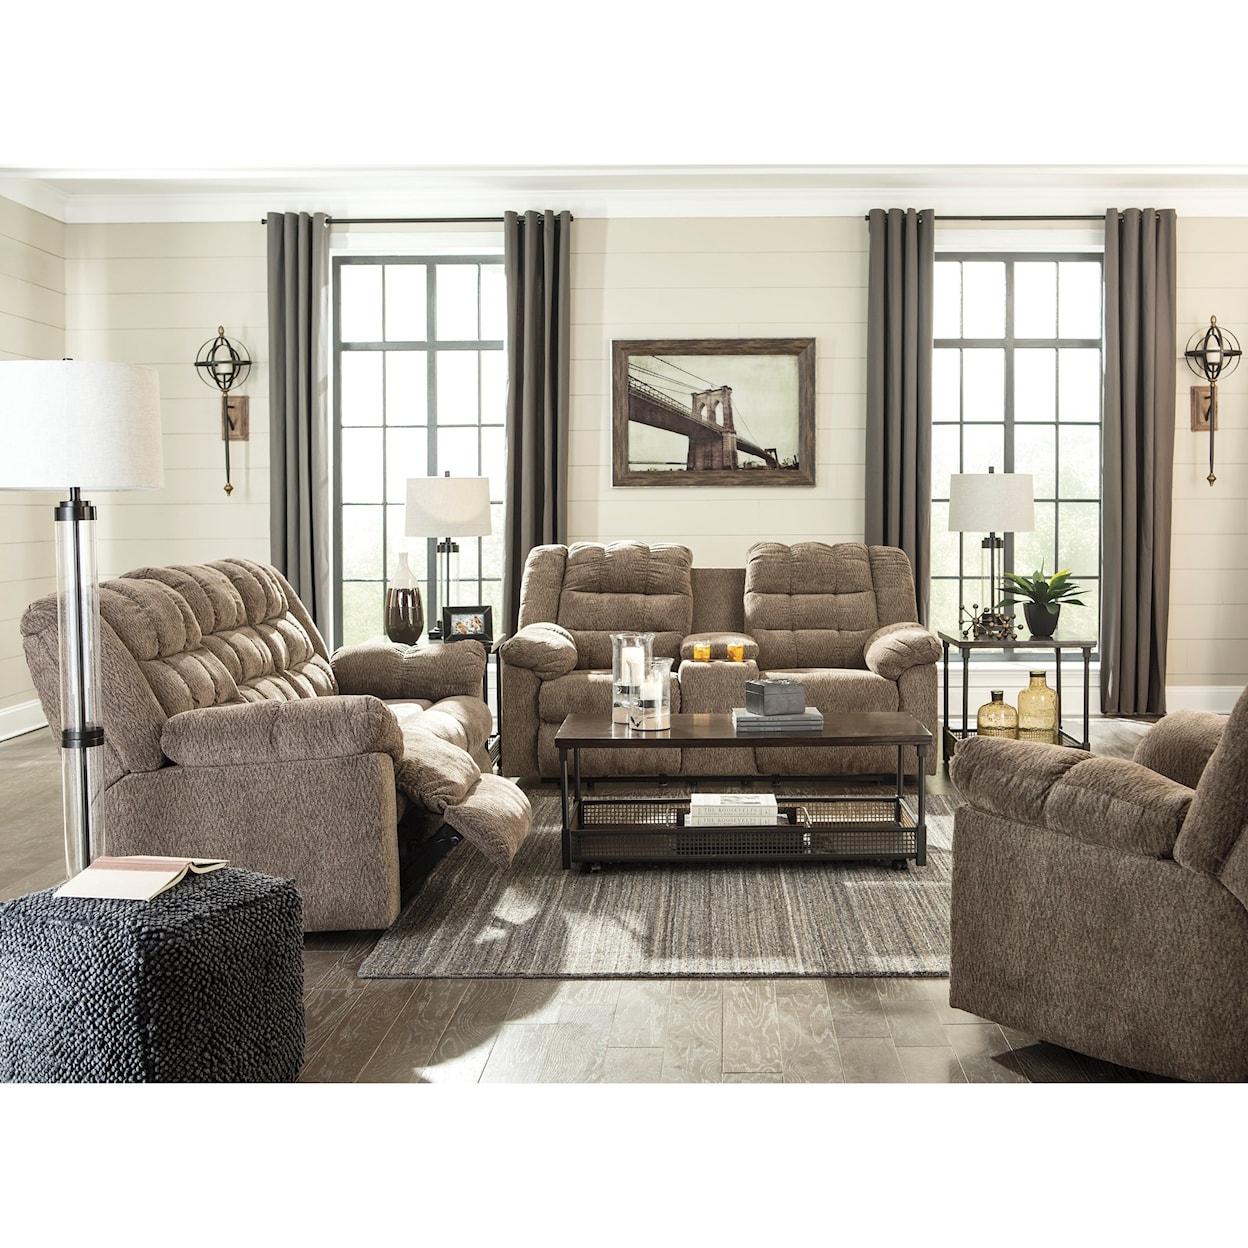 Signature Design by Ashley Workhorse Double Reclining Loveseat w/ Console